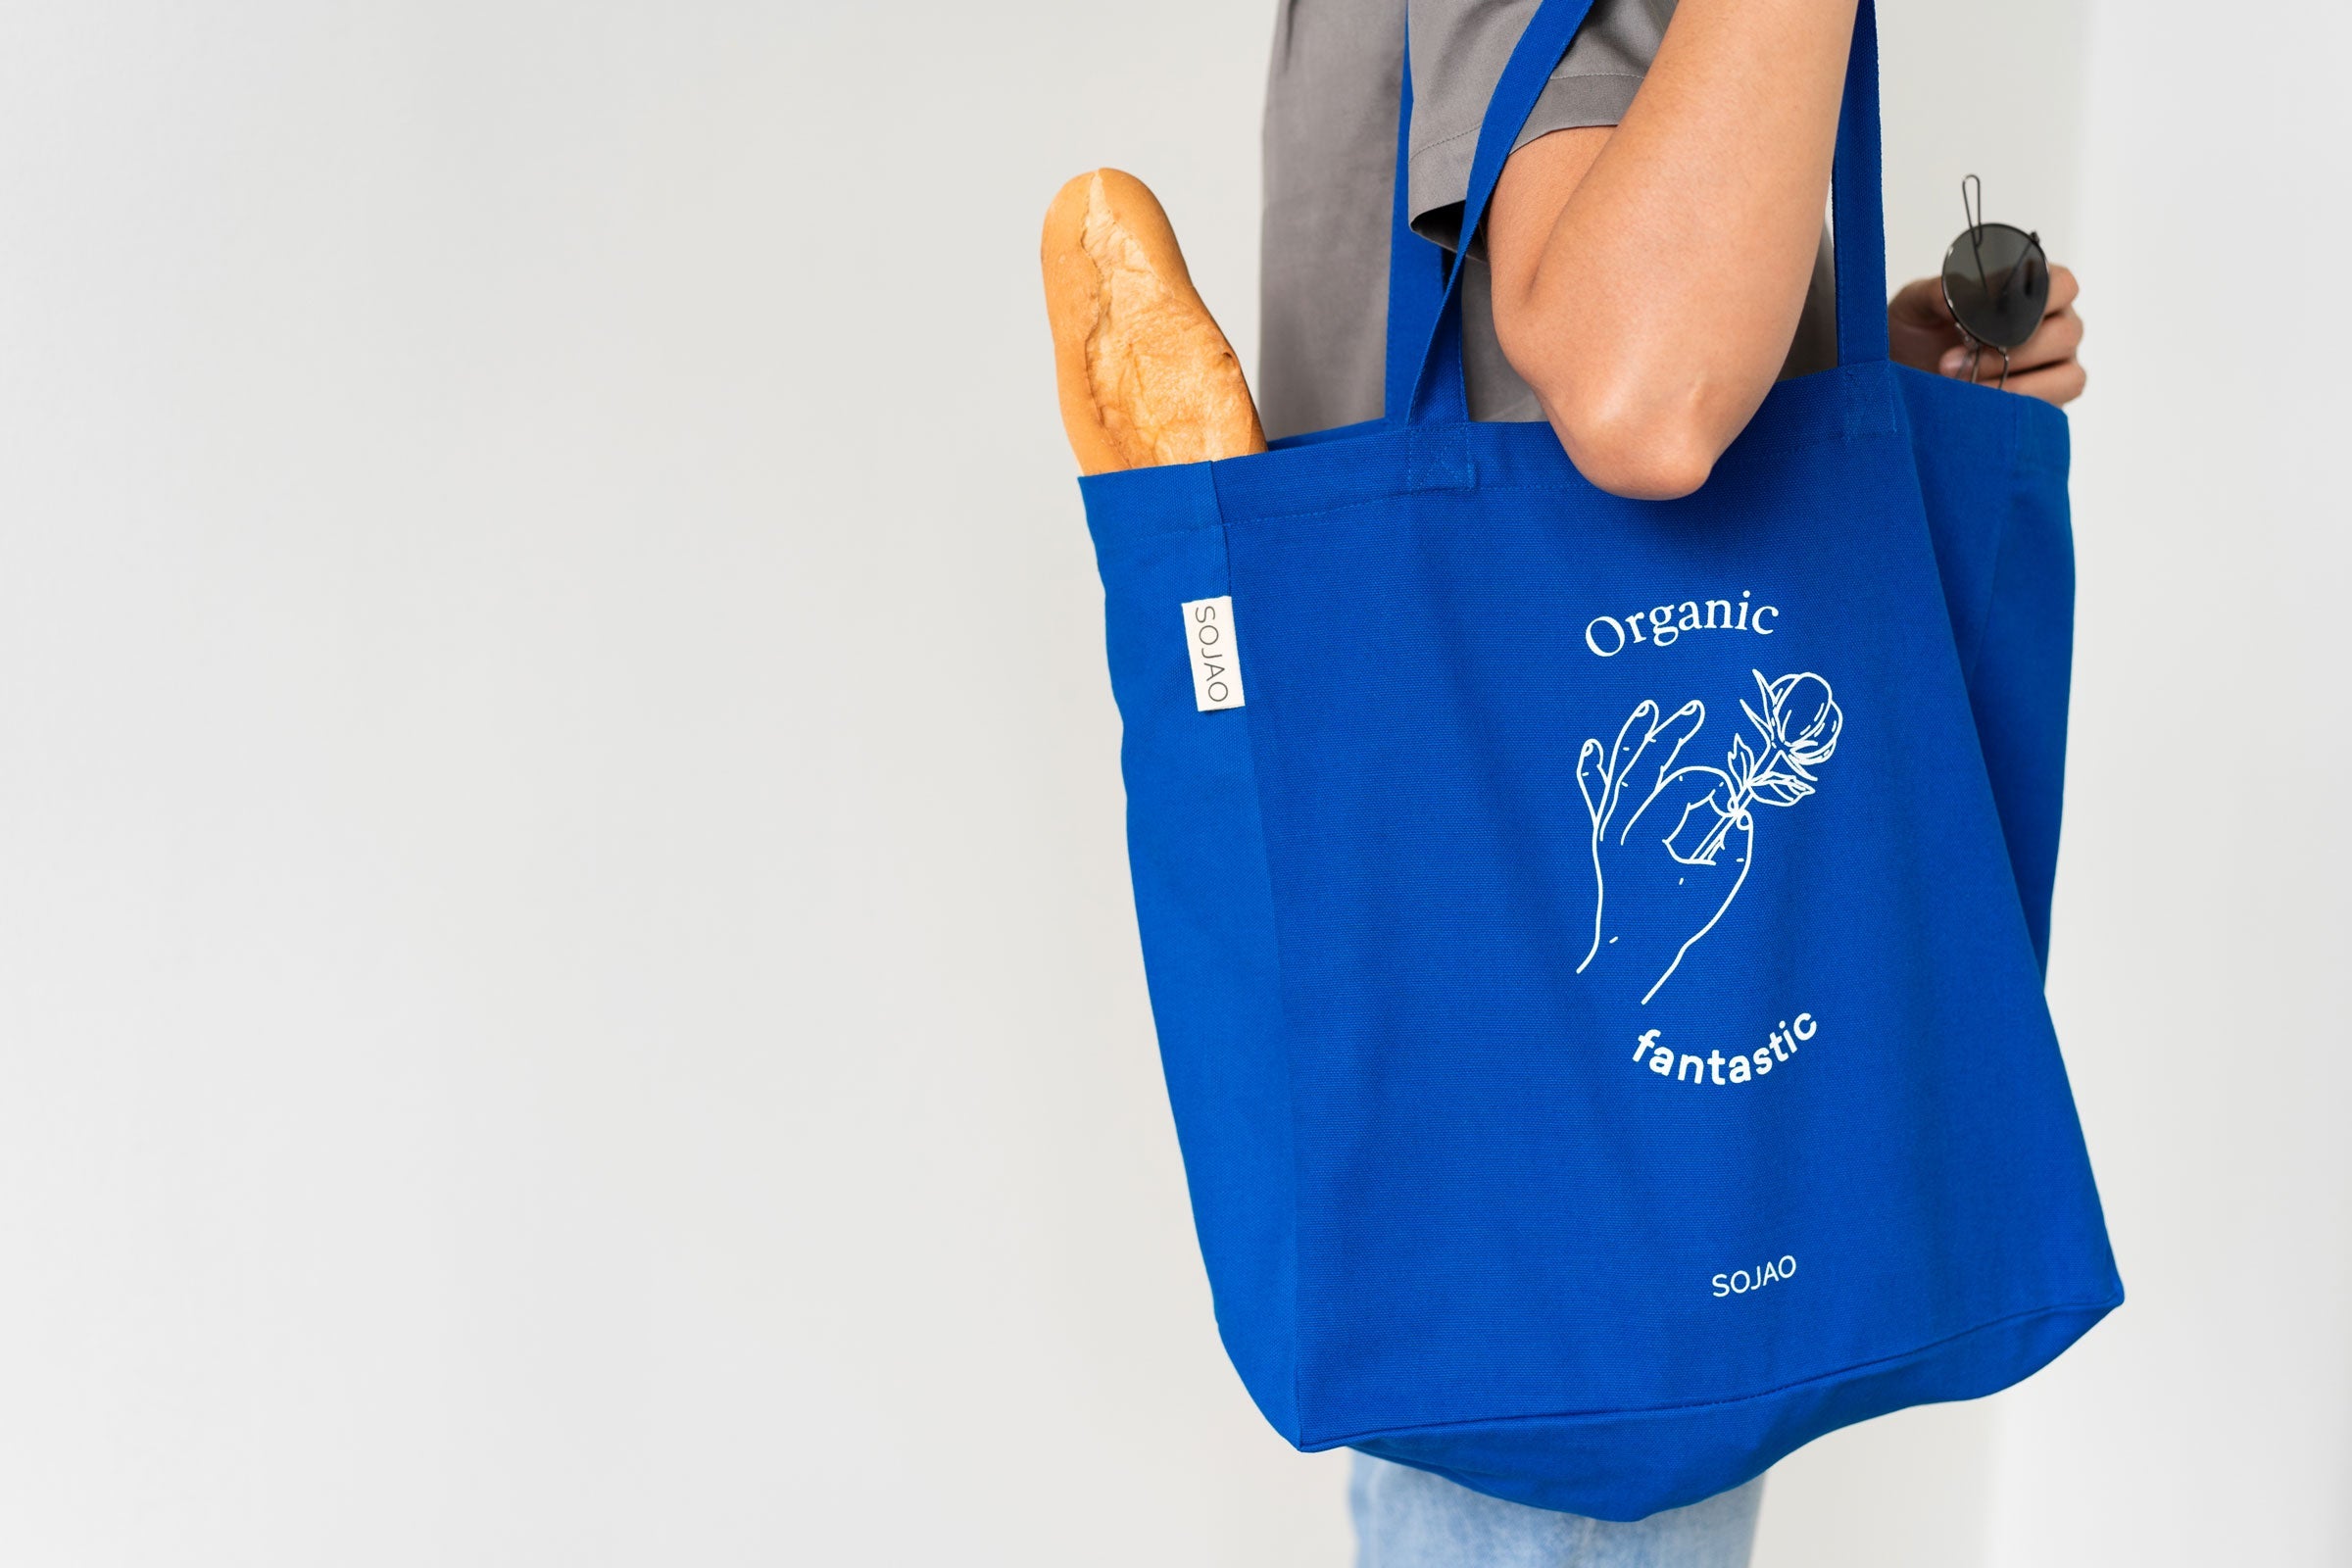 organic-cotton-tote-bag-in-blue-colour-carrying-a-baguette-by-sojao